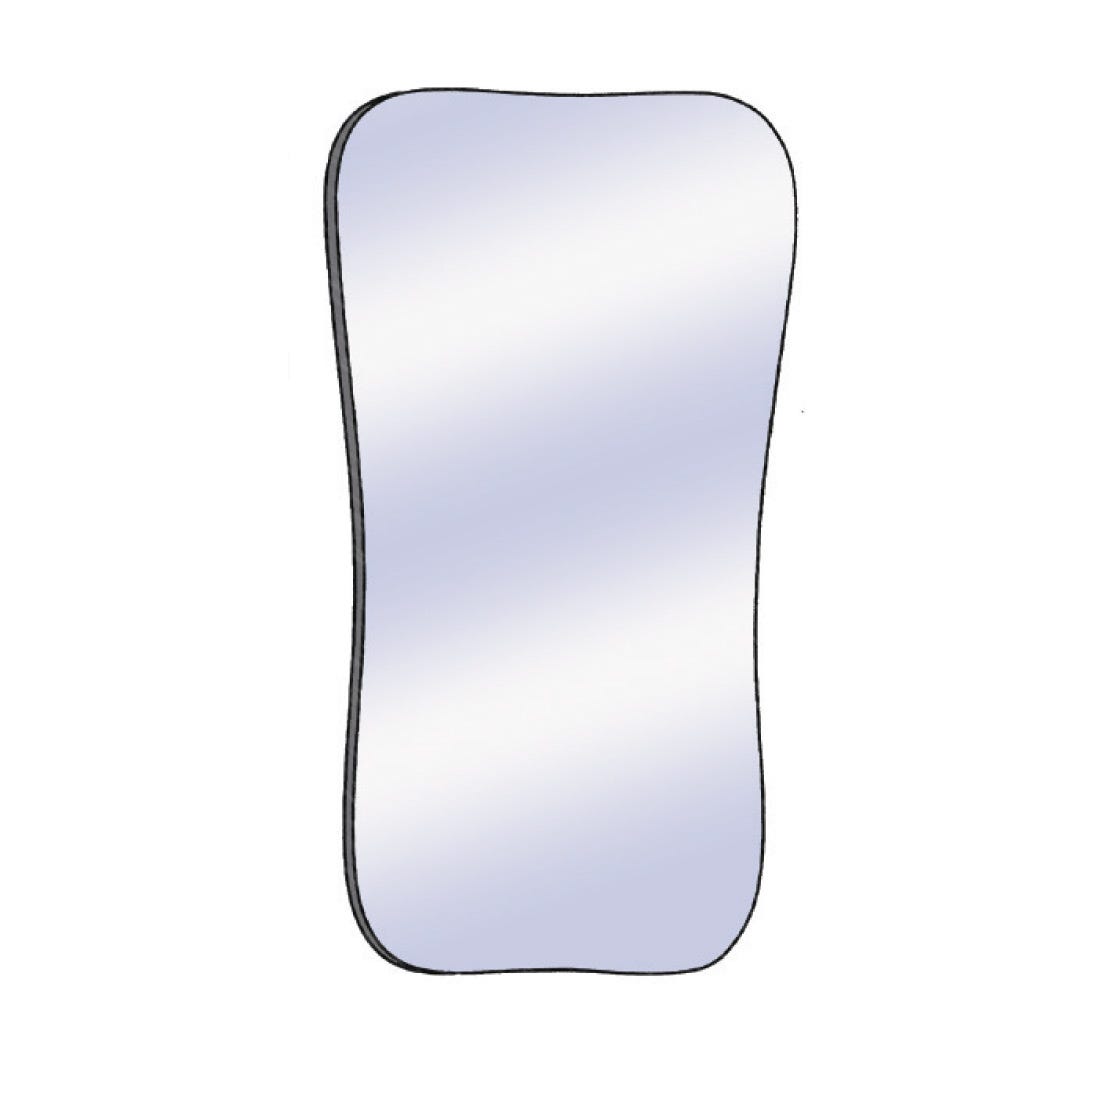 ACE Large Intraoral Occlusal Photo Mirror, double sided